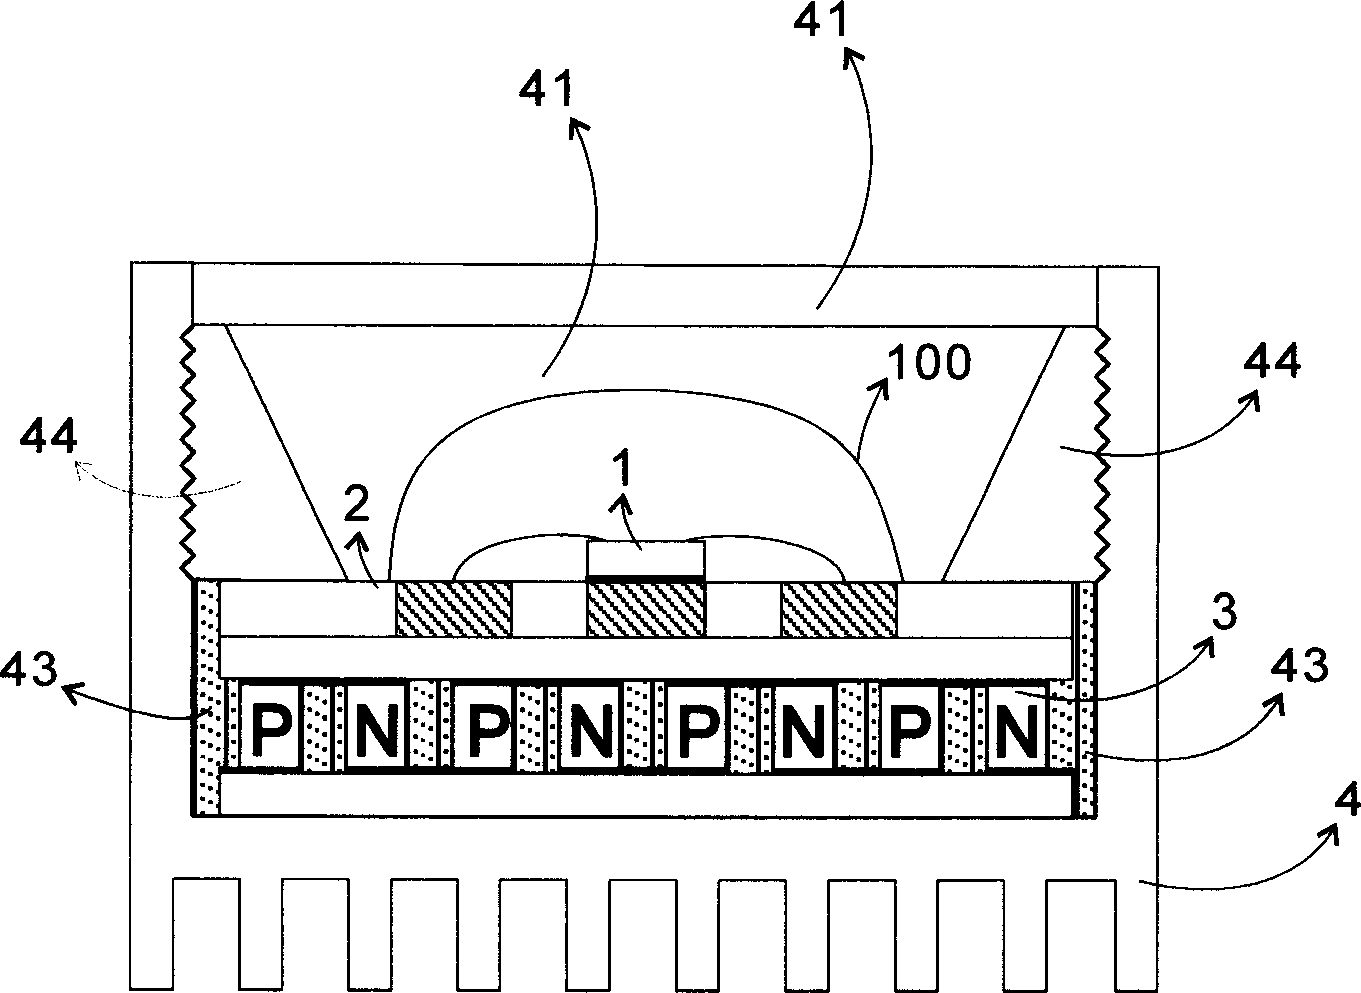 Envelope for luminous elements of semiconductor in large power